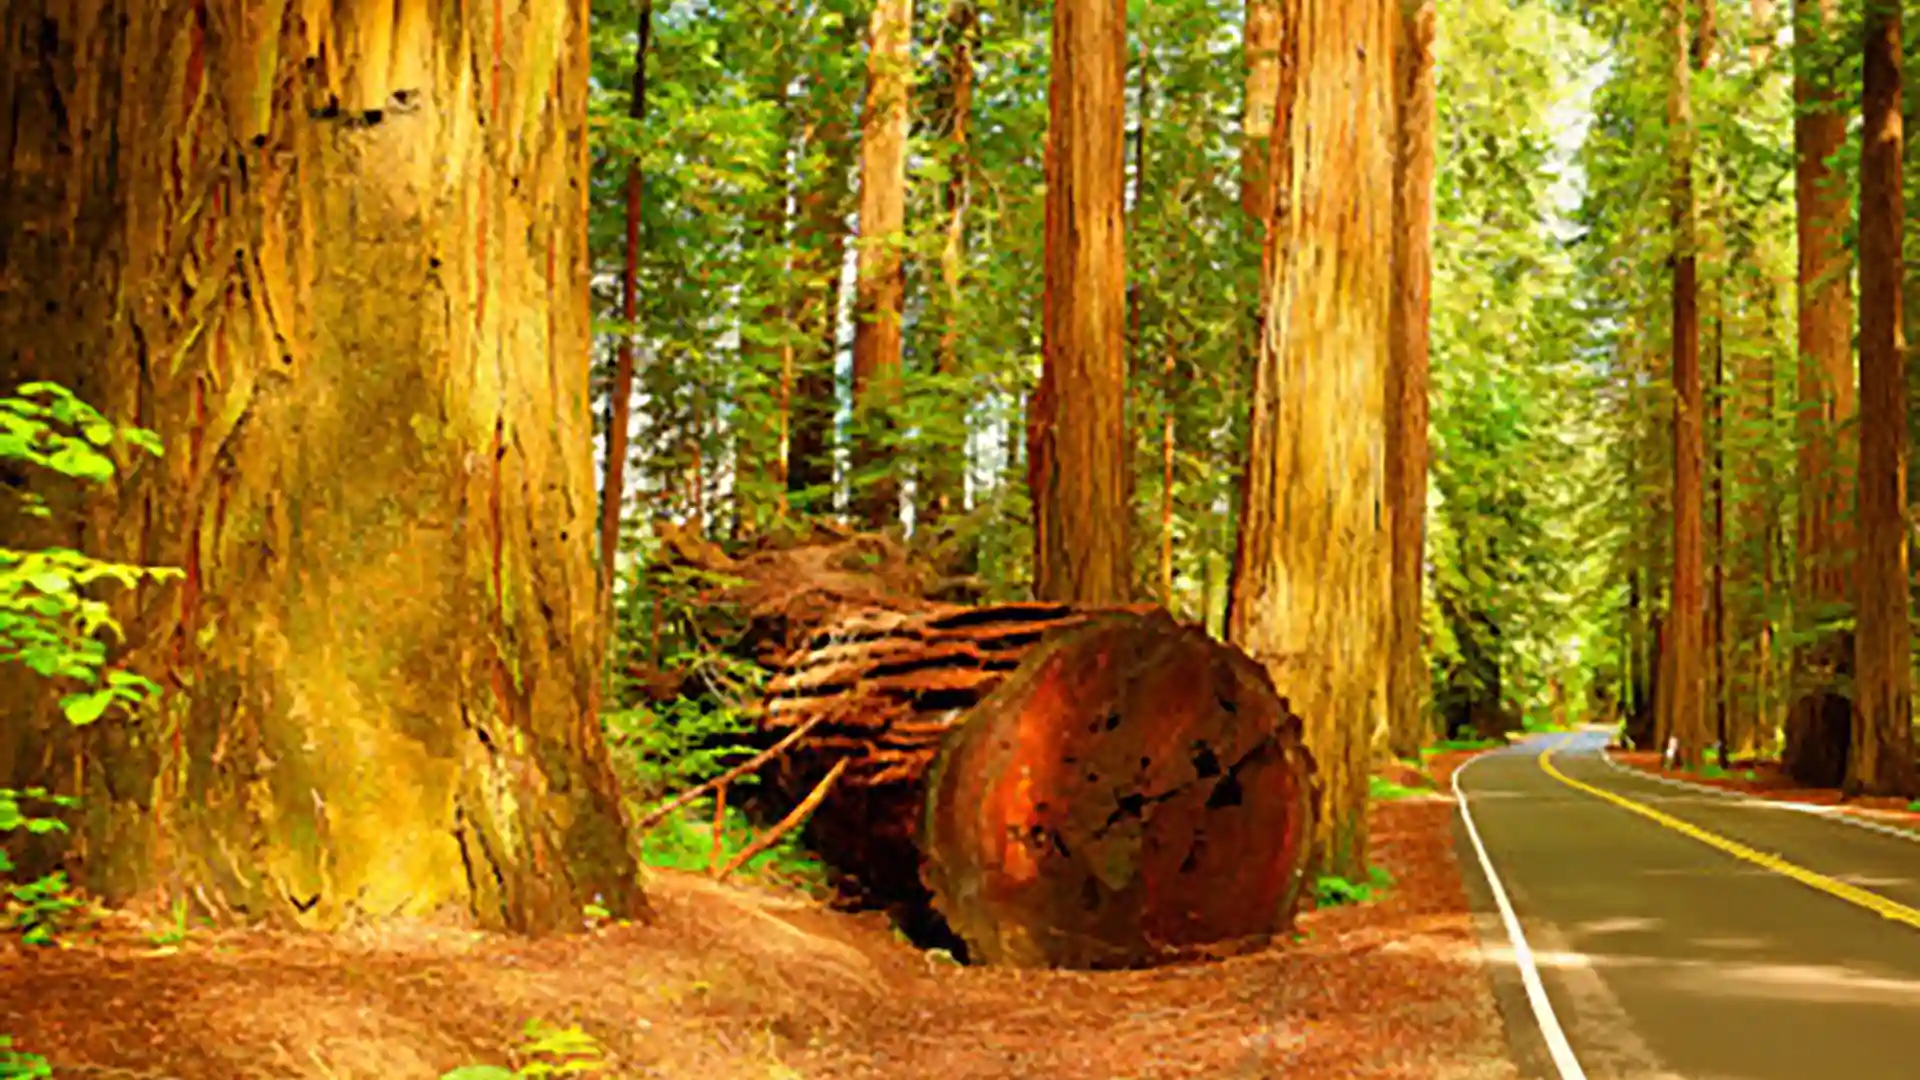 Your Guide to Seeing the California Redwoods